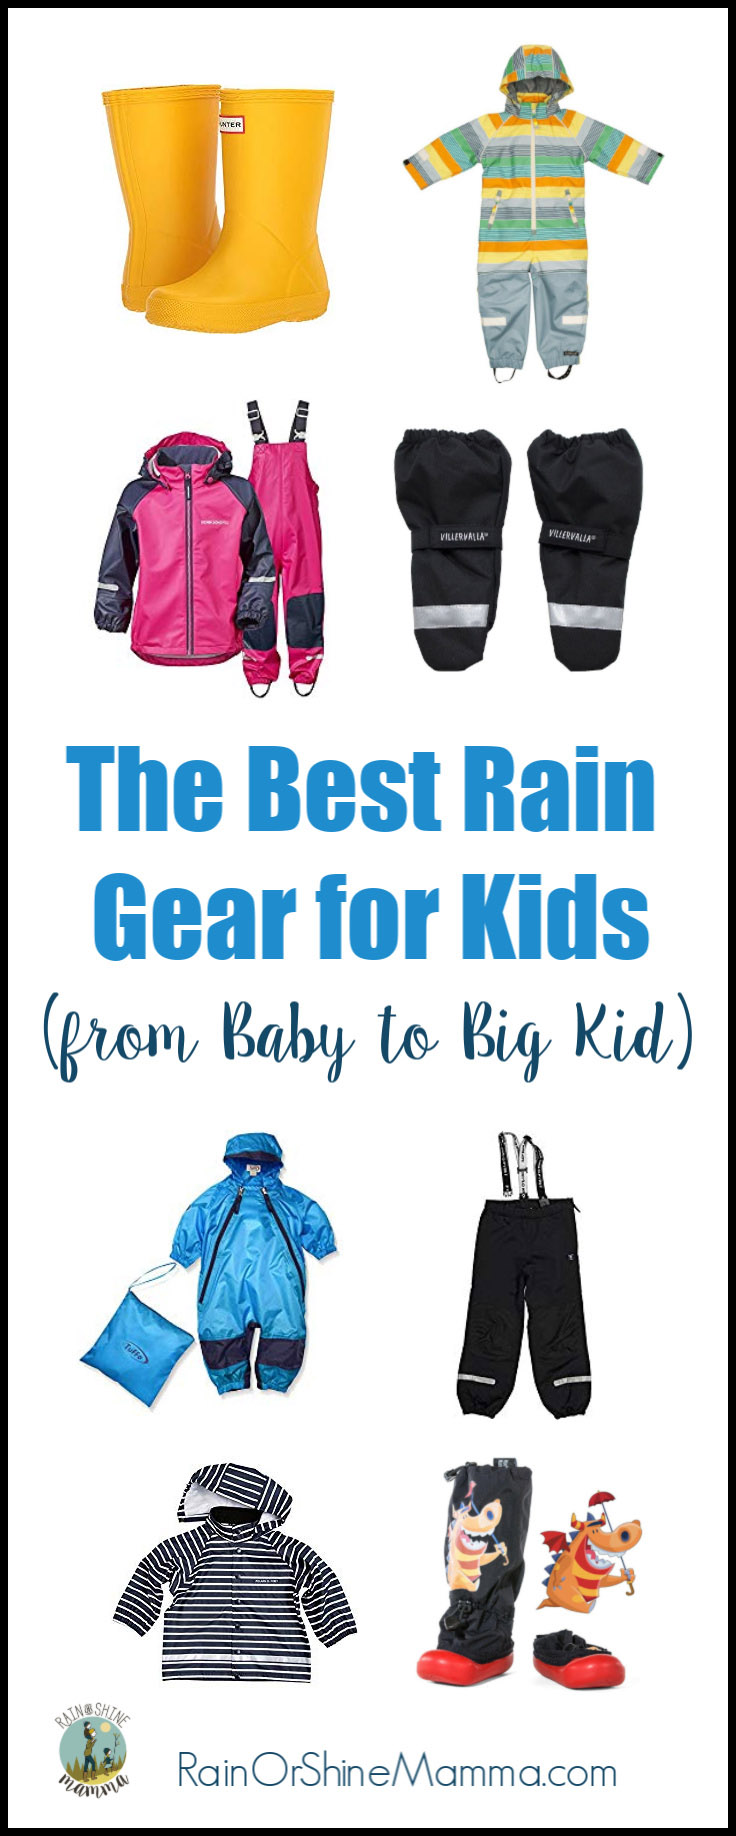 The Best Rain Gear for Kids (from Baby to Big Kid)